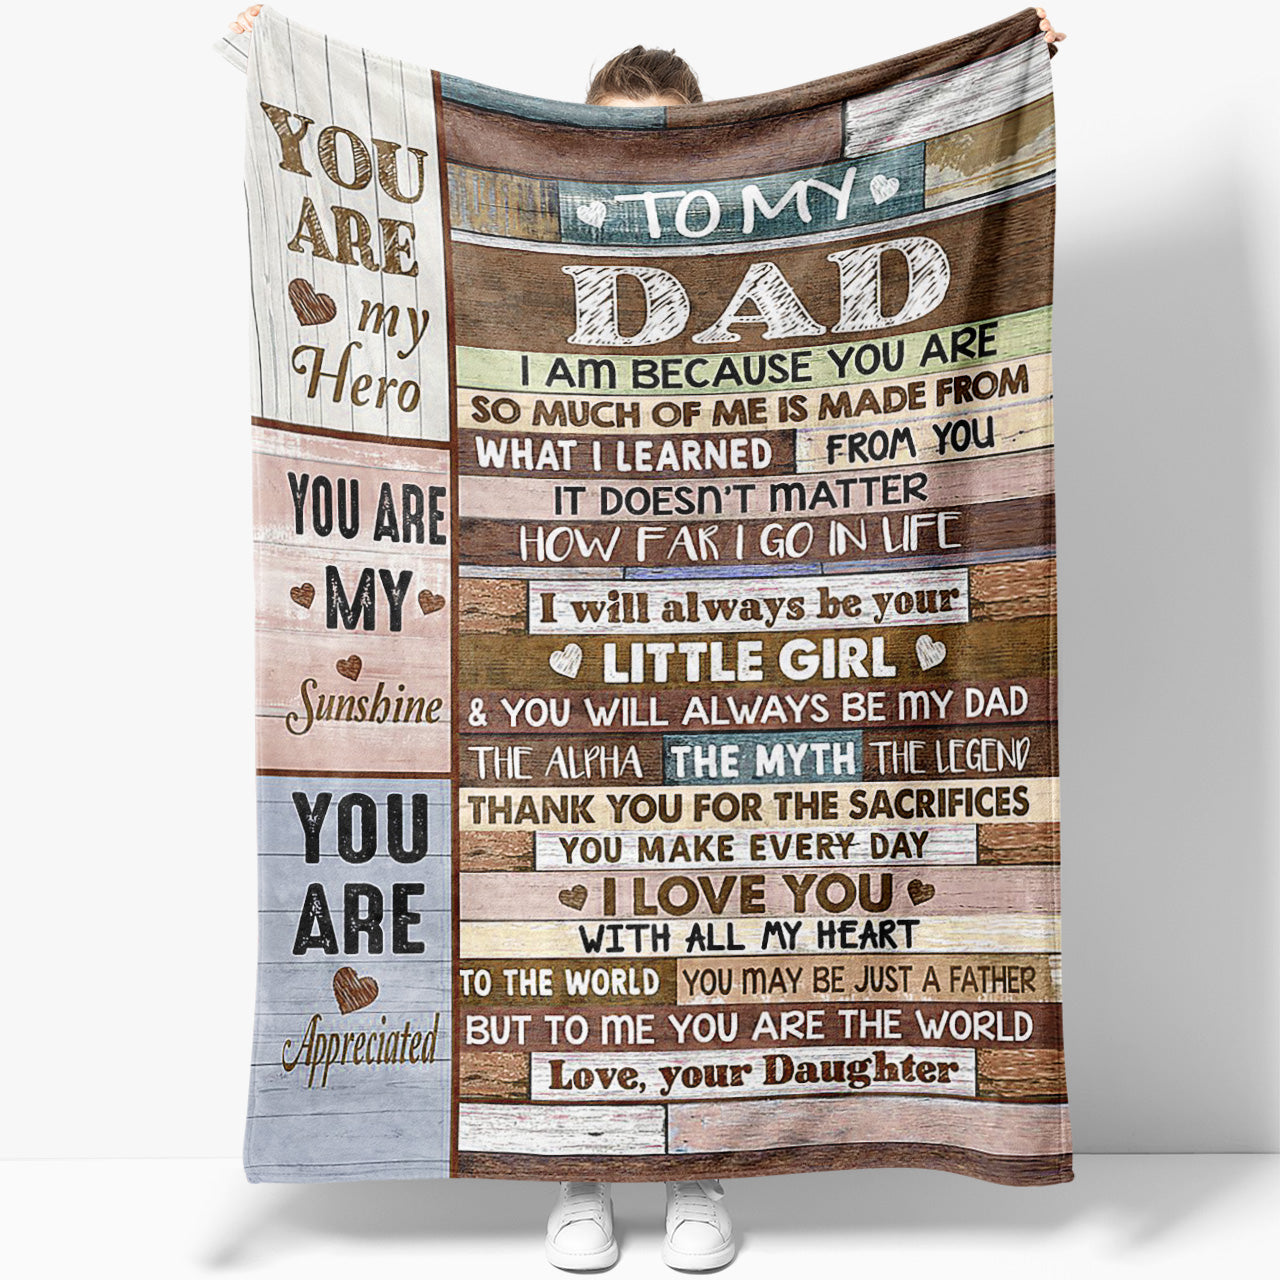 Blanket Gift for Dad, Be My Dad The Alpha The Myth The Legend Blanket